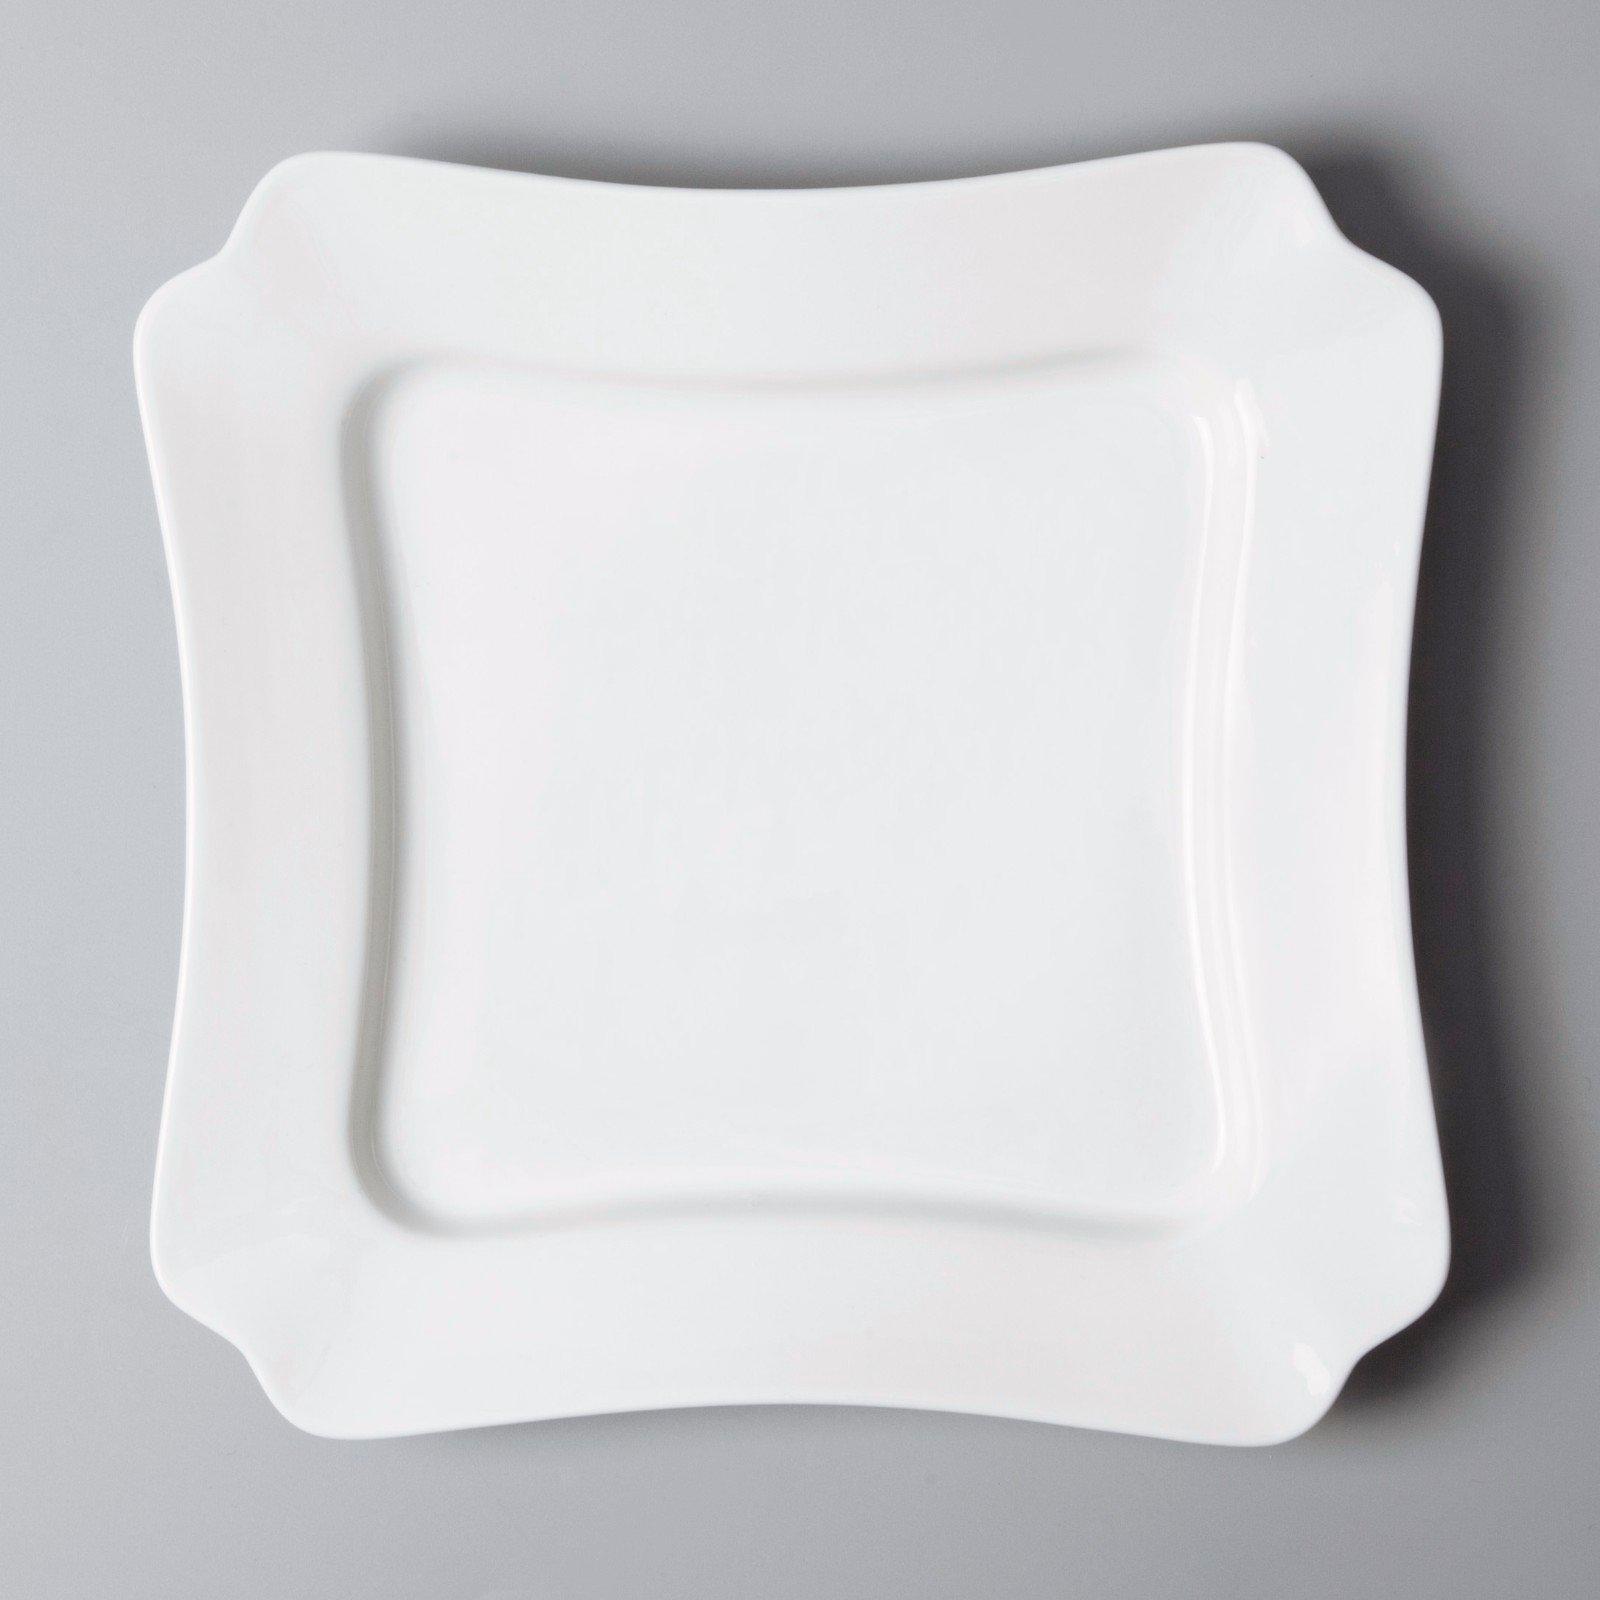 Two Eight smoothly white porcelain dinnerware sets from China for dinner-2